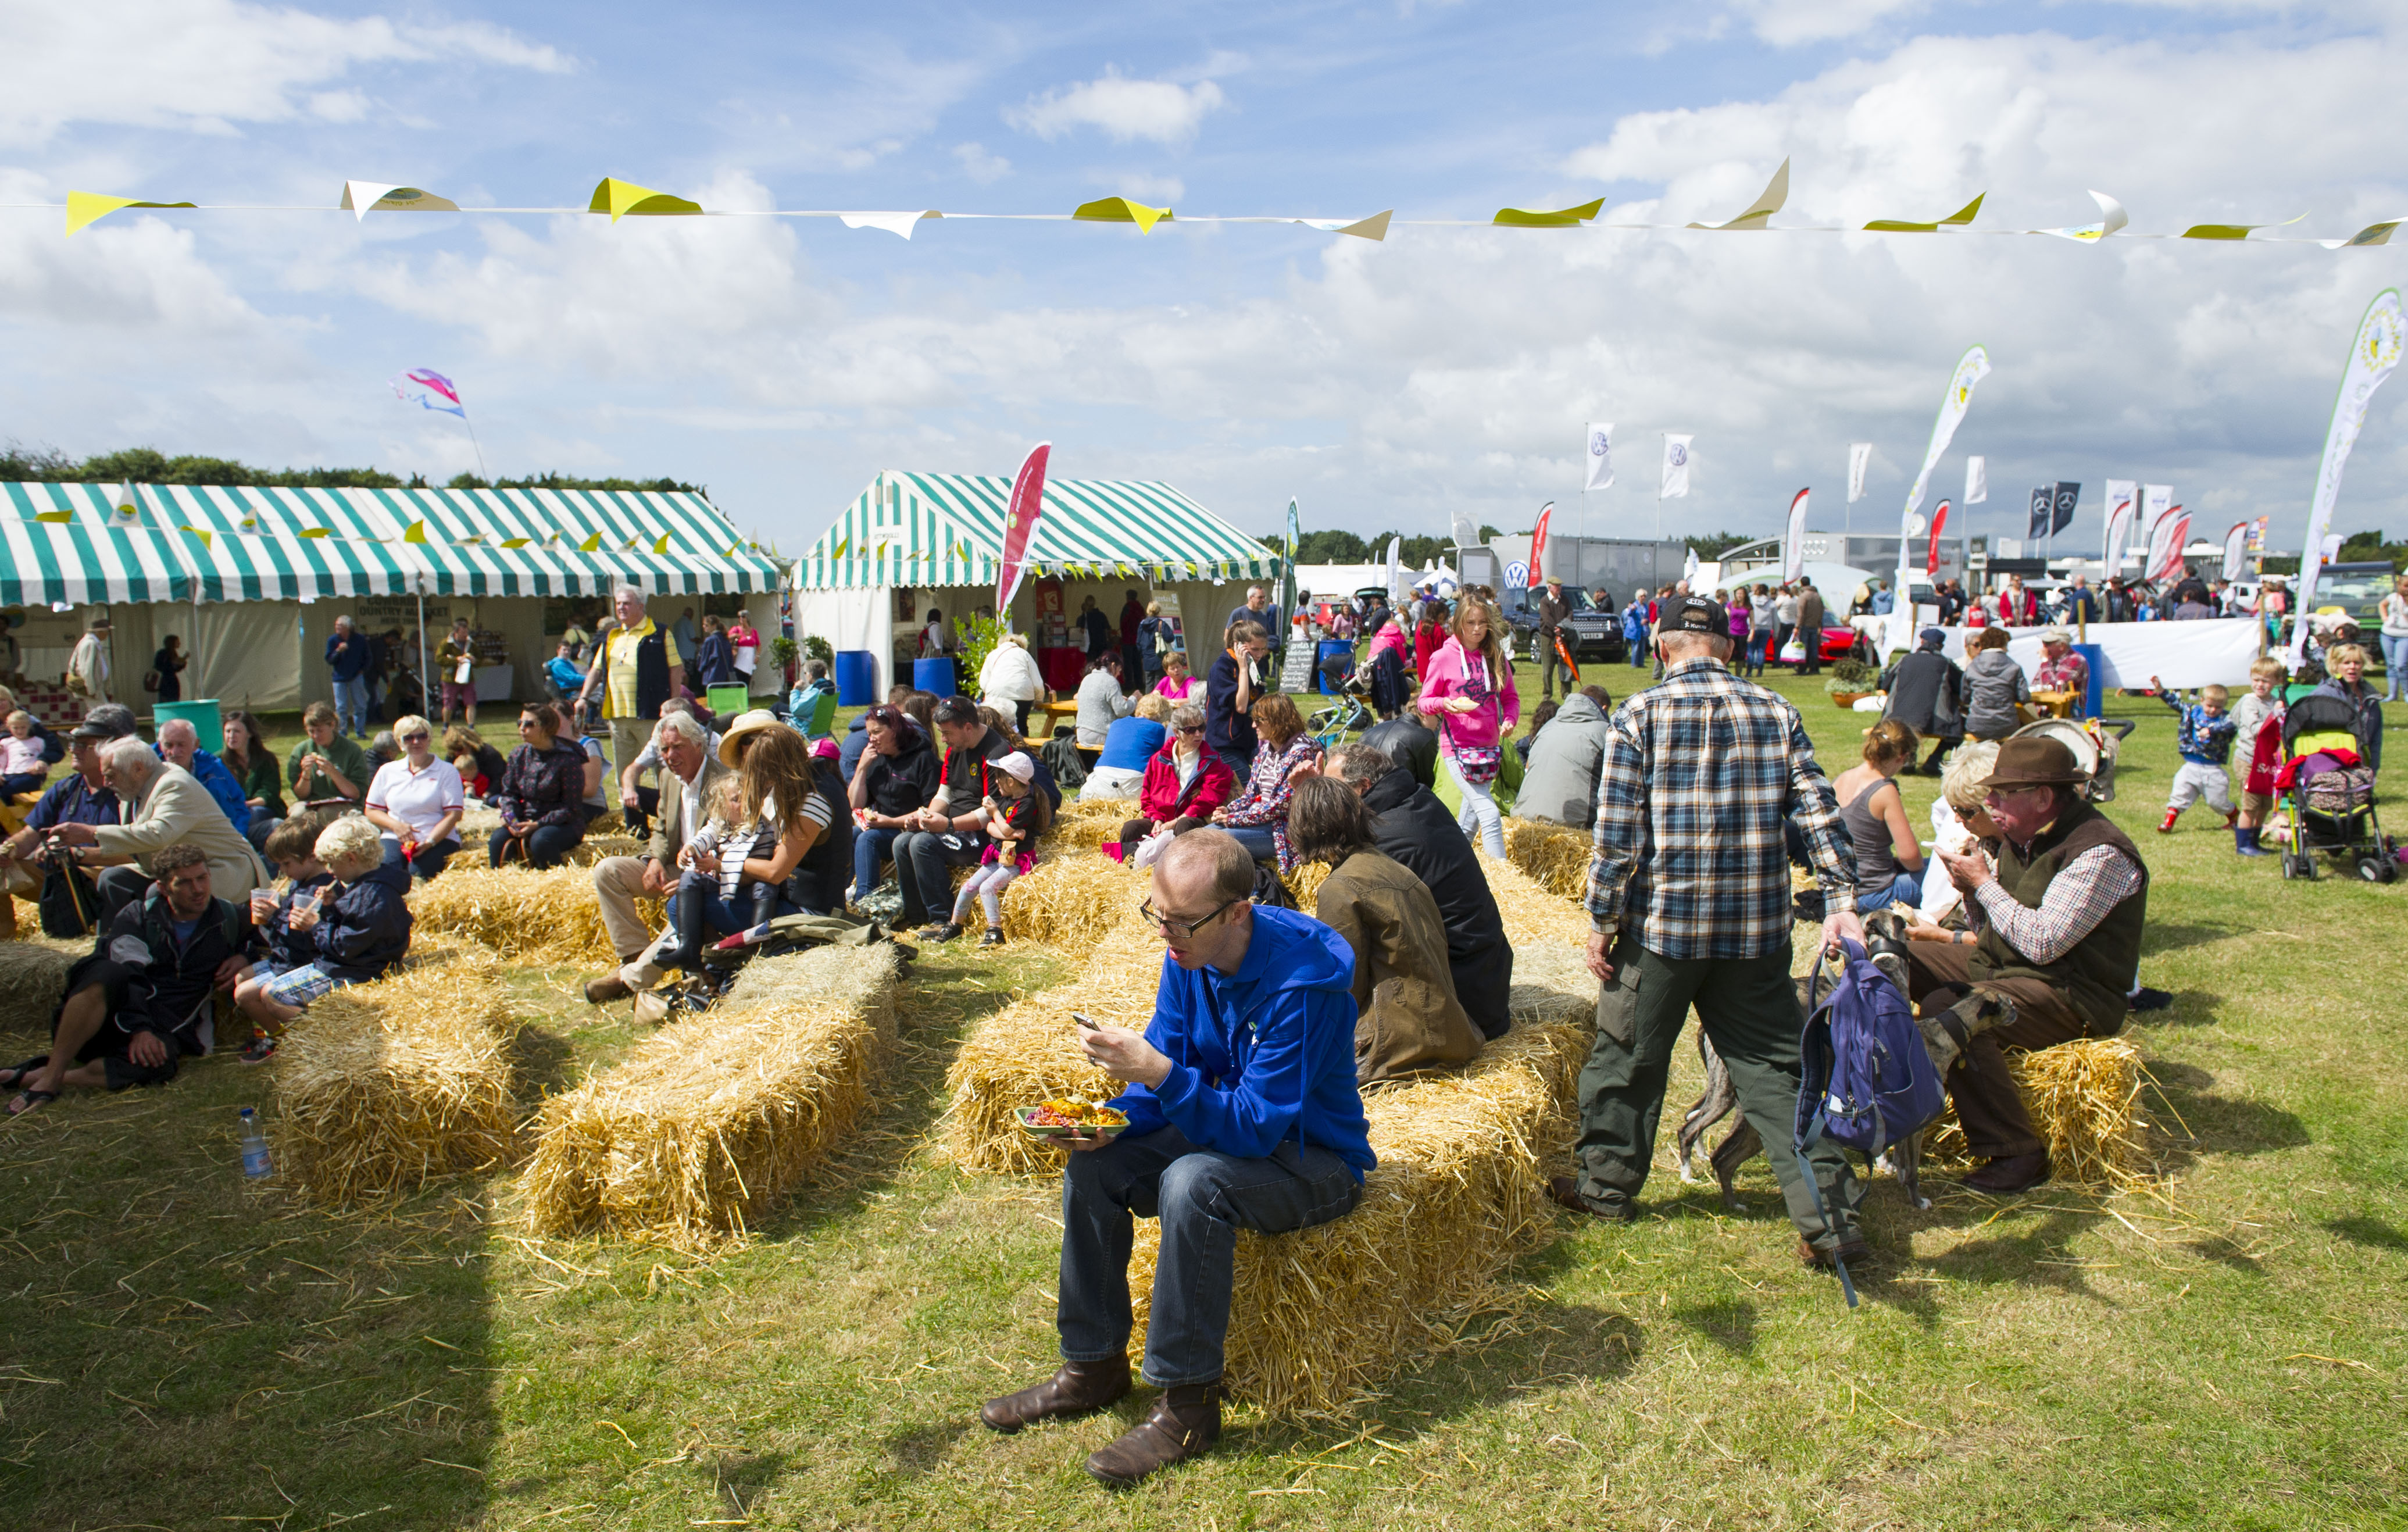 130814_1393 – The Vale of Glamorgan Show